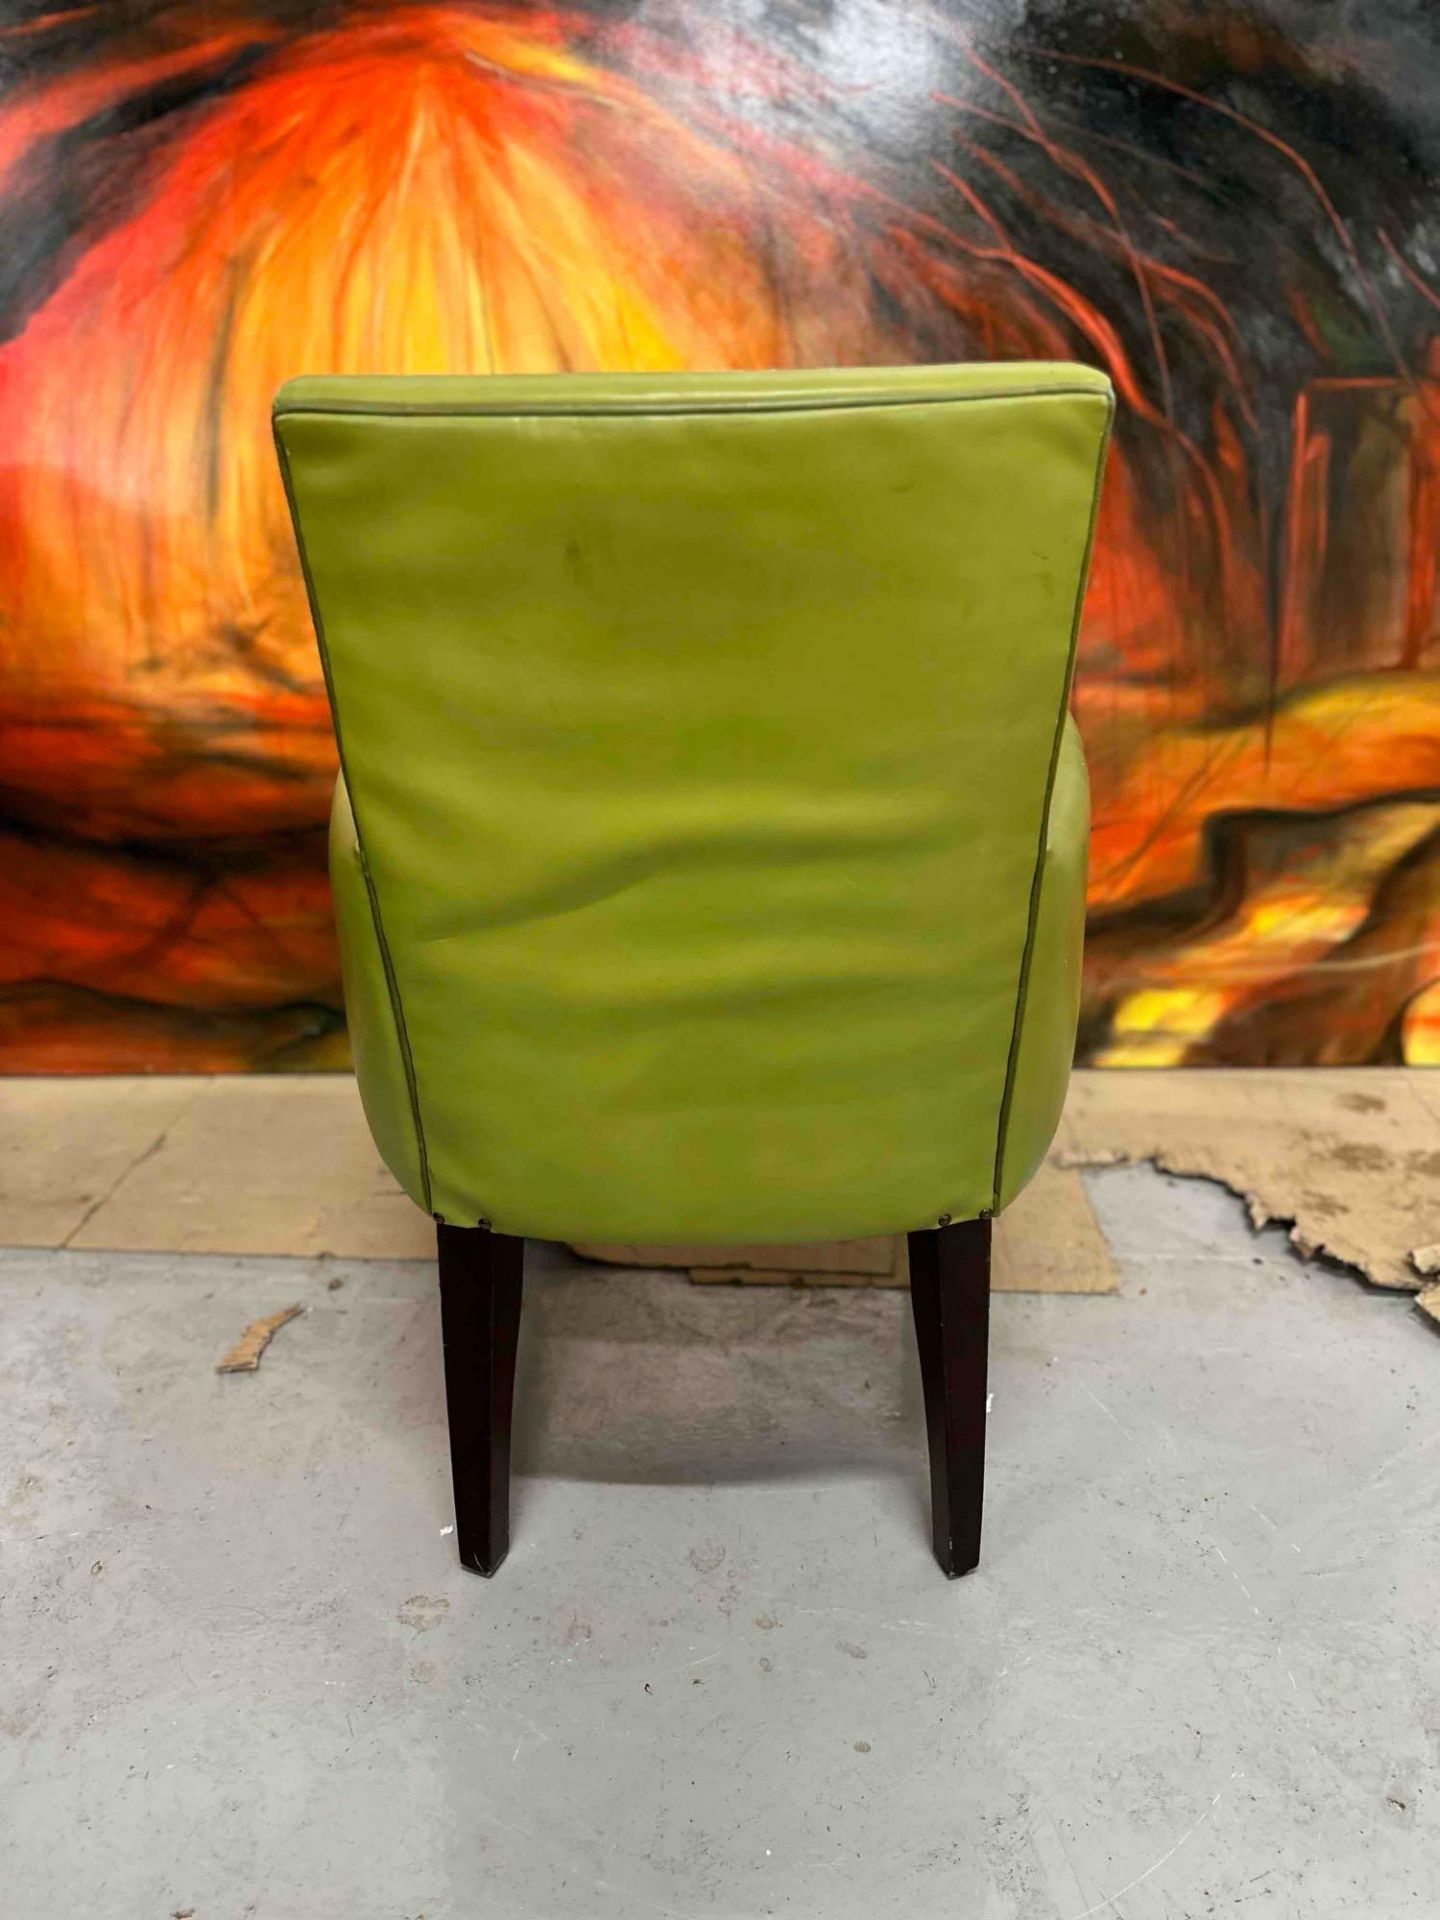 Colber International Lime Green Leather Armchair With Button Detail On Wooden Frame Enjoy - Image 4 of 5